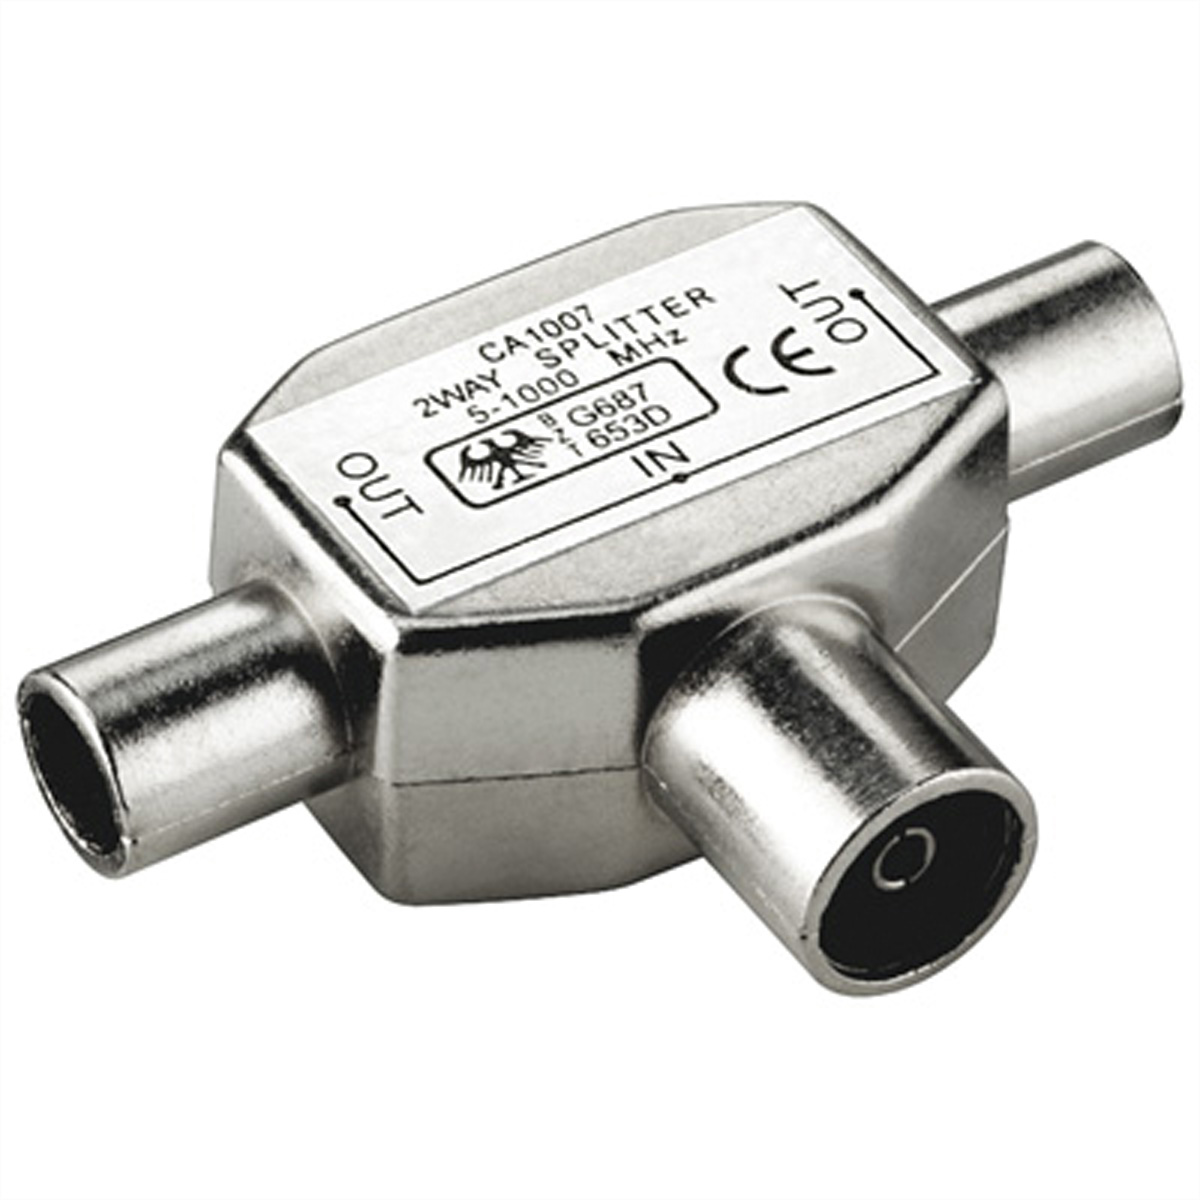 VALUE Koaxial T-Adapter